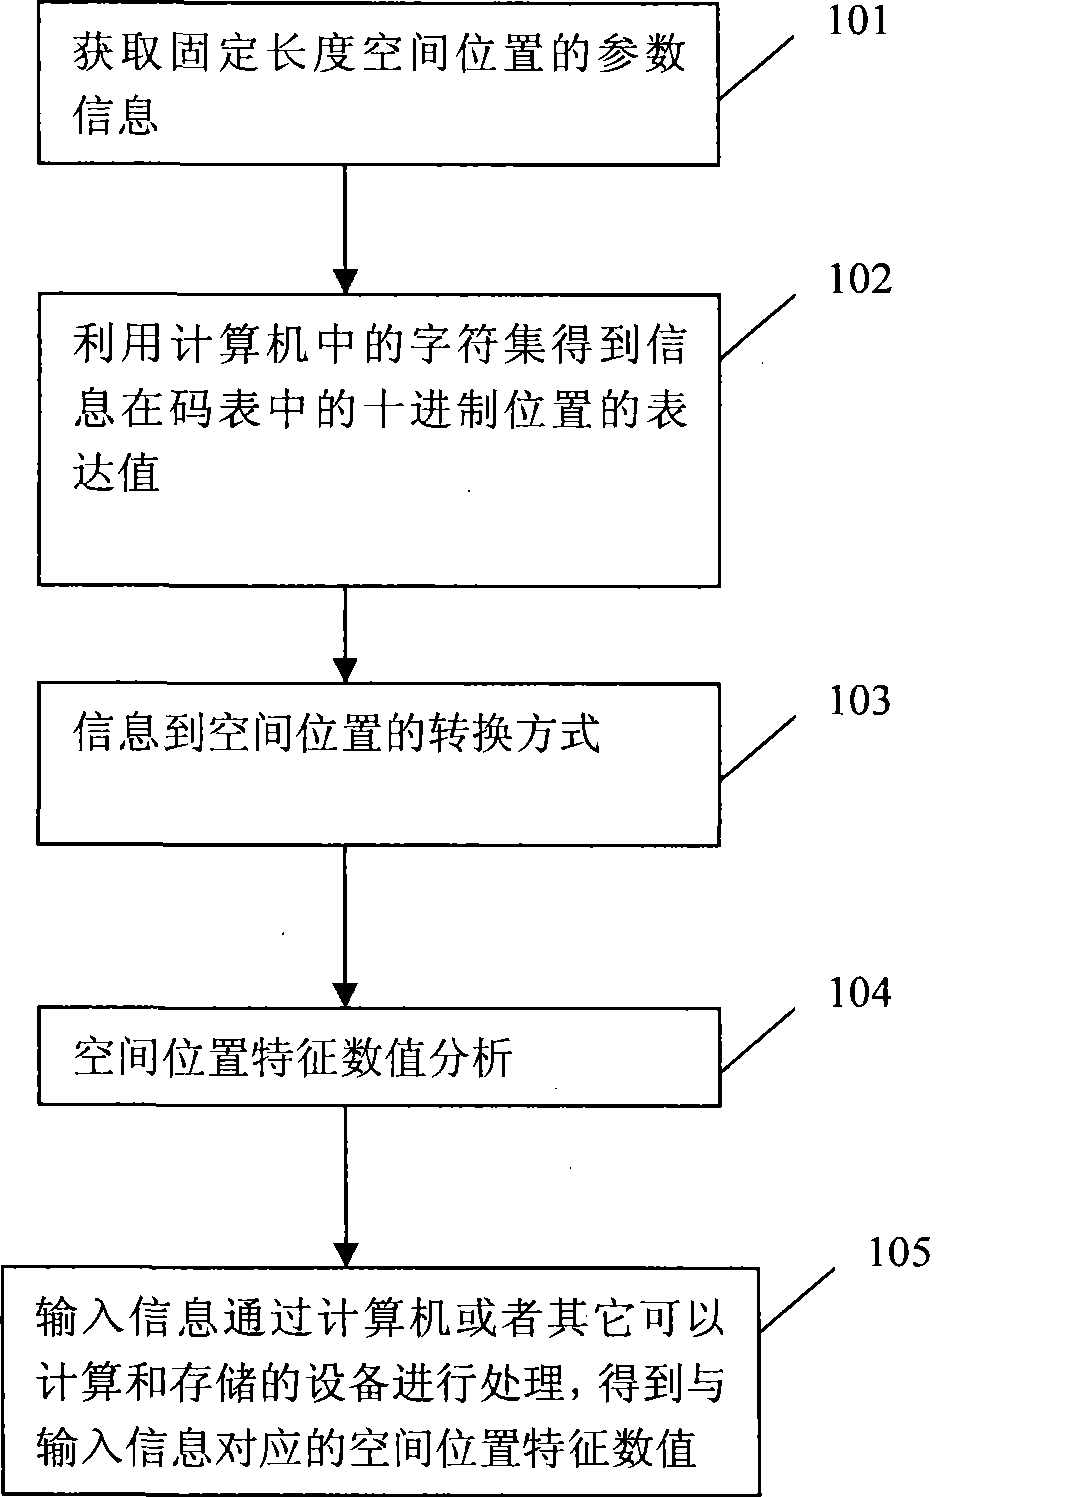 Method for extracting spacial position feature value of fixed length from information